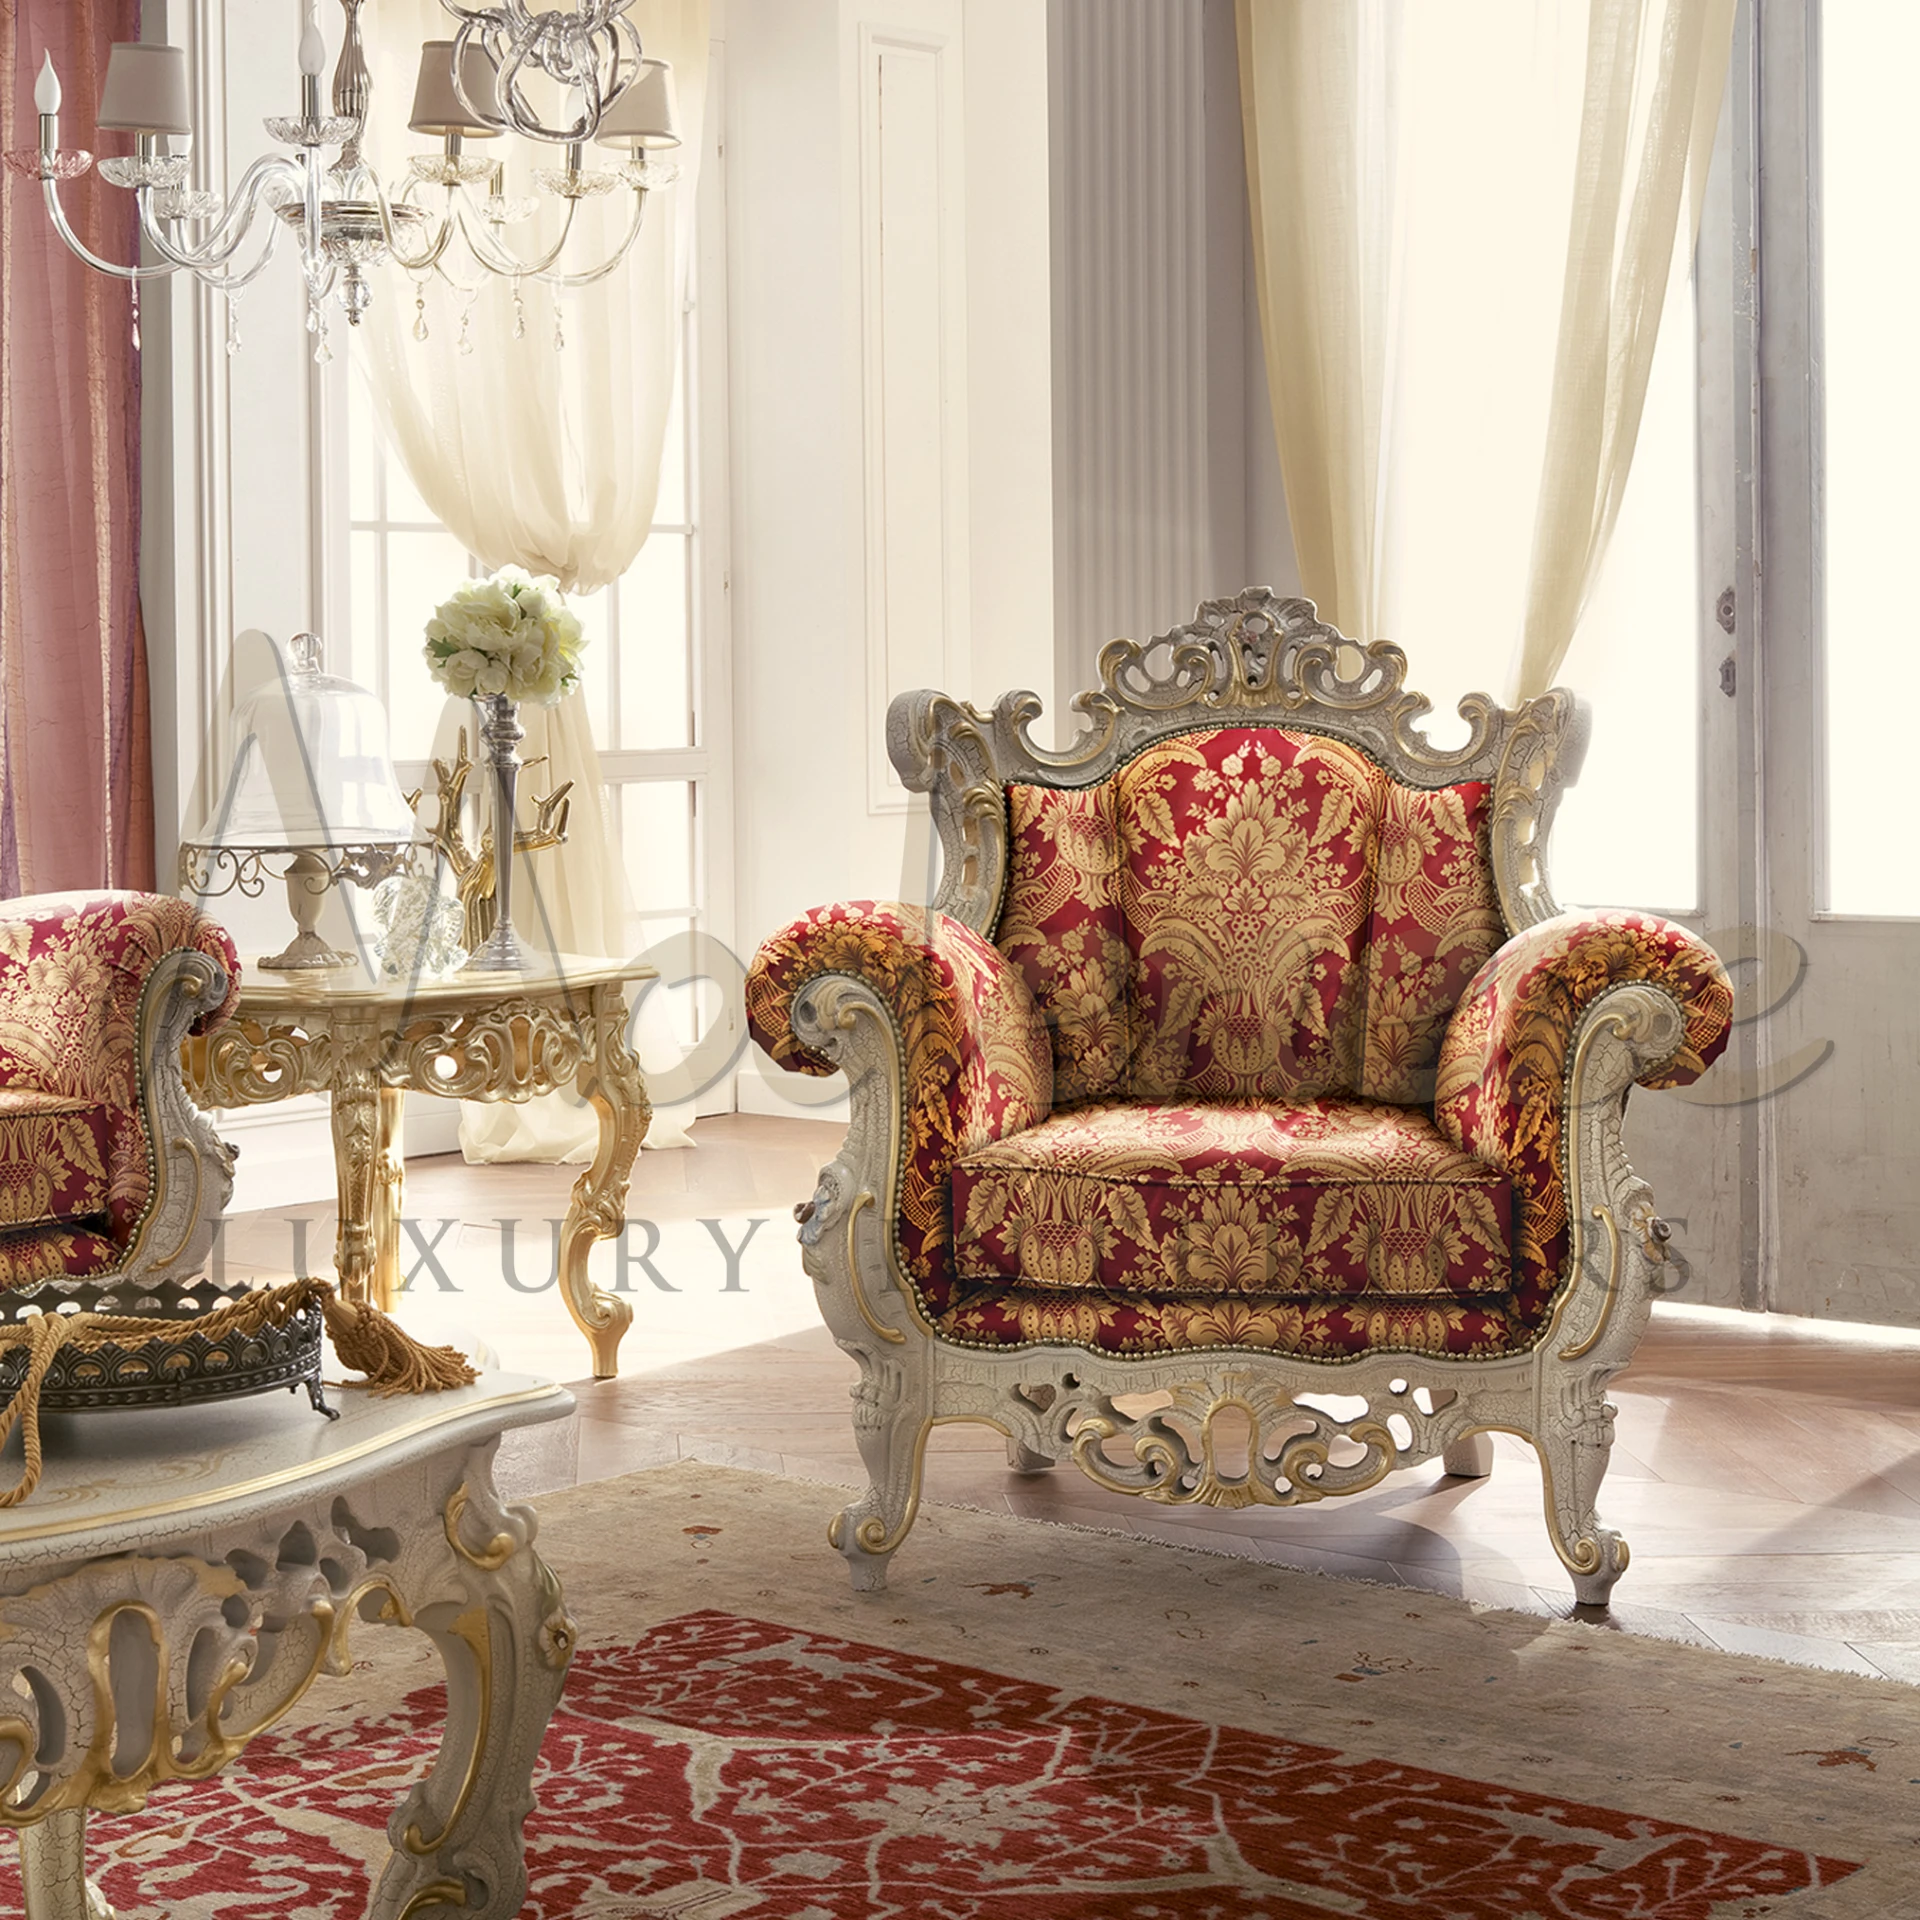 Experience opulence with our meticulously crafted handmade Neo-Baroque throne armchair. Designed for royalty, indulge in its lavish comfort and ornate detailing. 